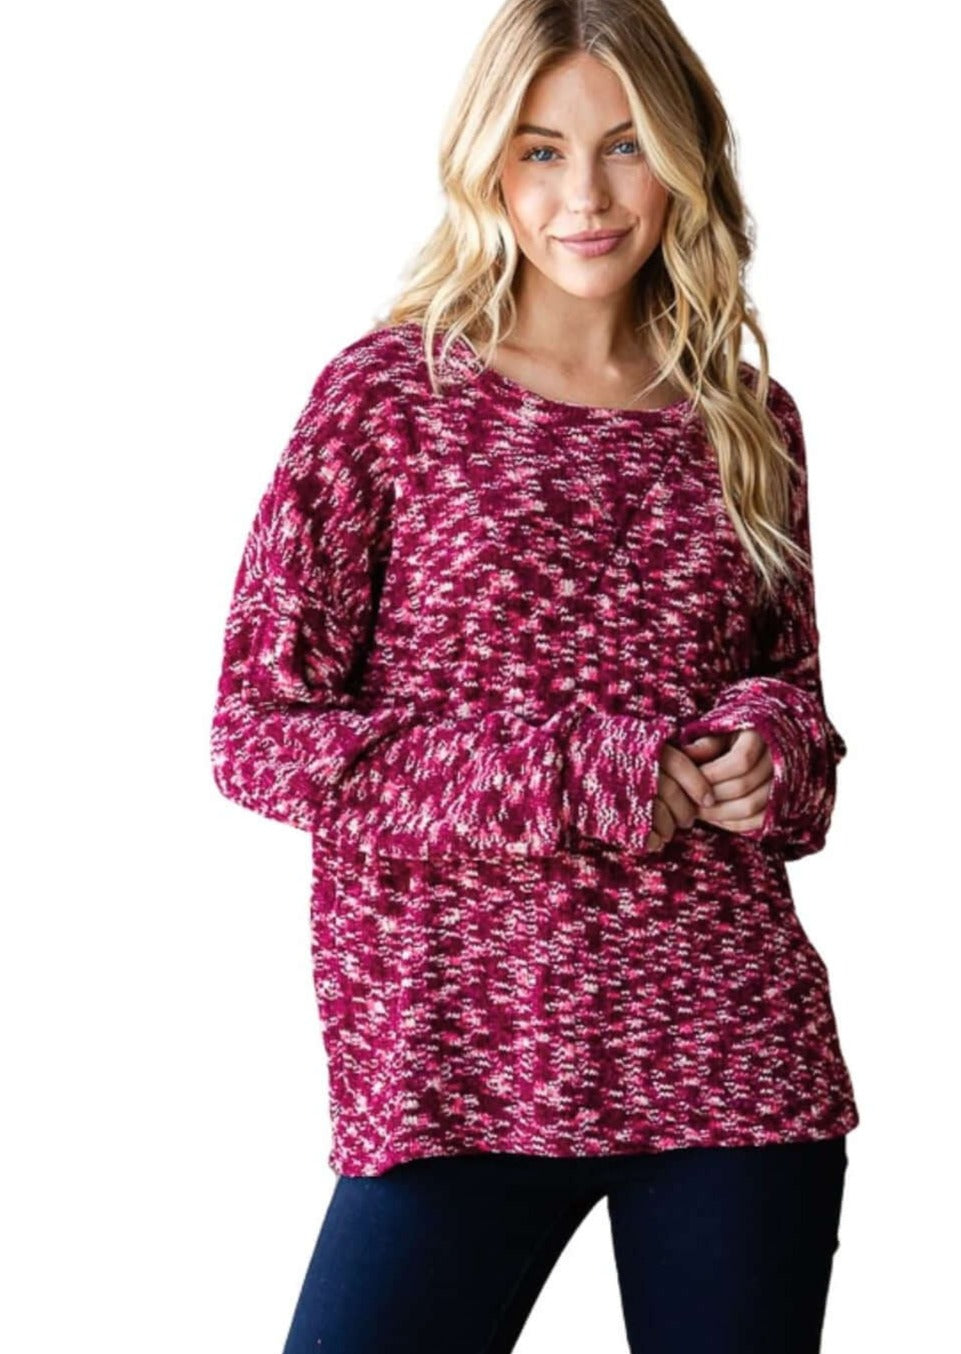 Super Soft Two Tone Teddy Bear Sweater Relaxed Oversized Fit in burgundy, pink & white | Made in USA | Classy Cozy Cool American Made Boutique